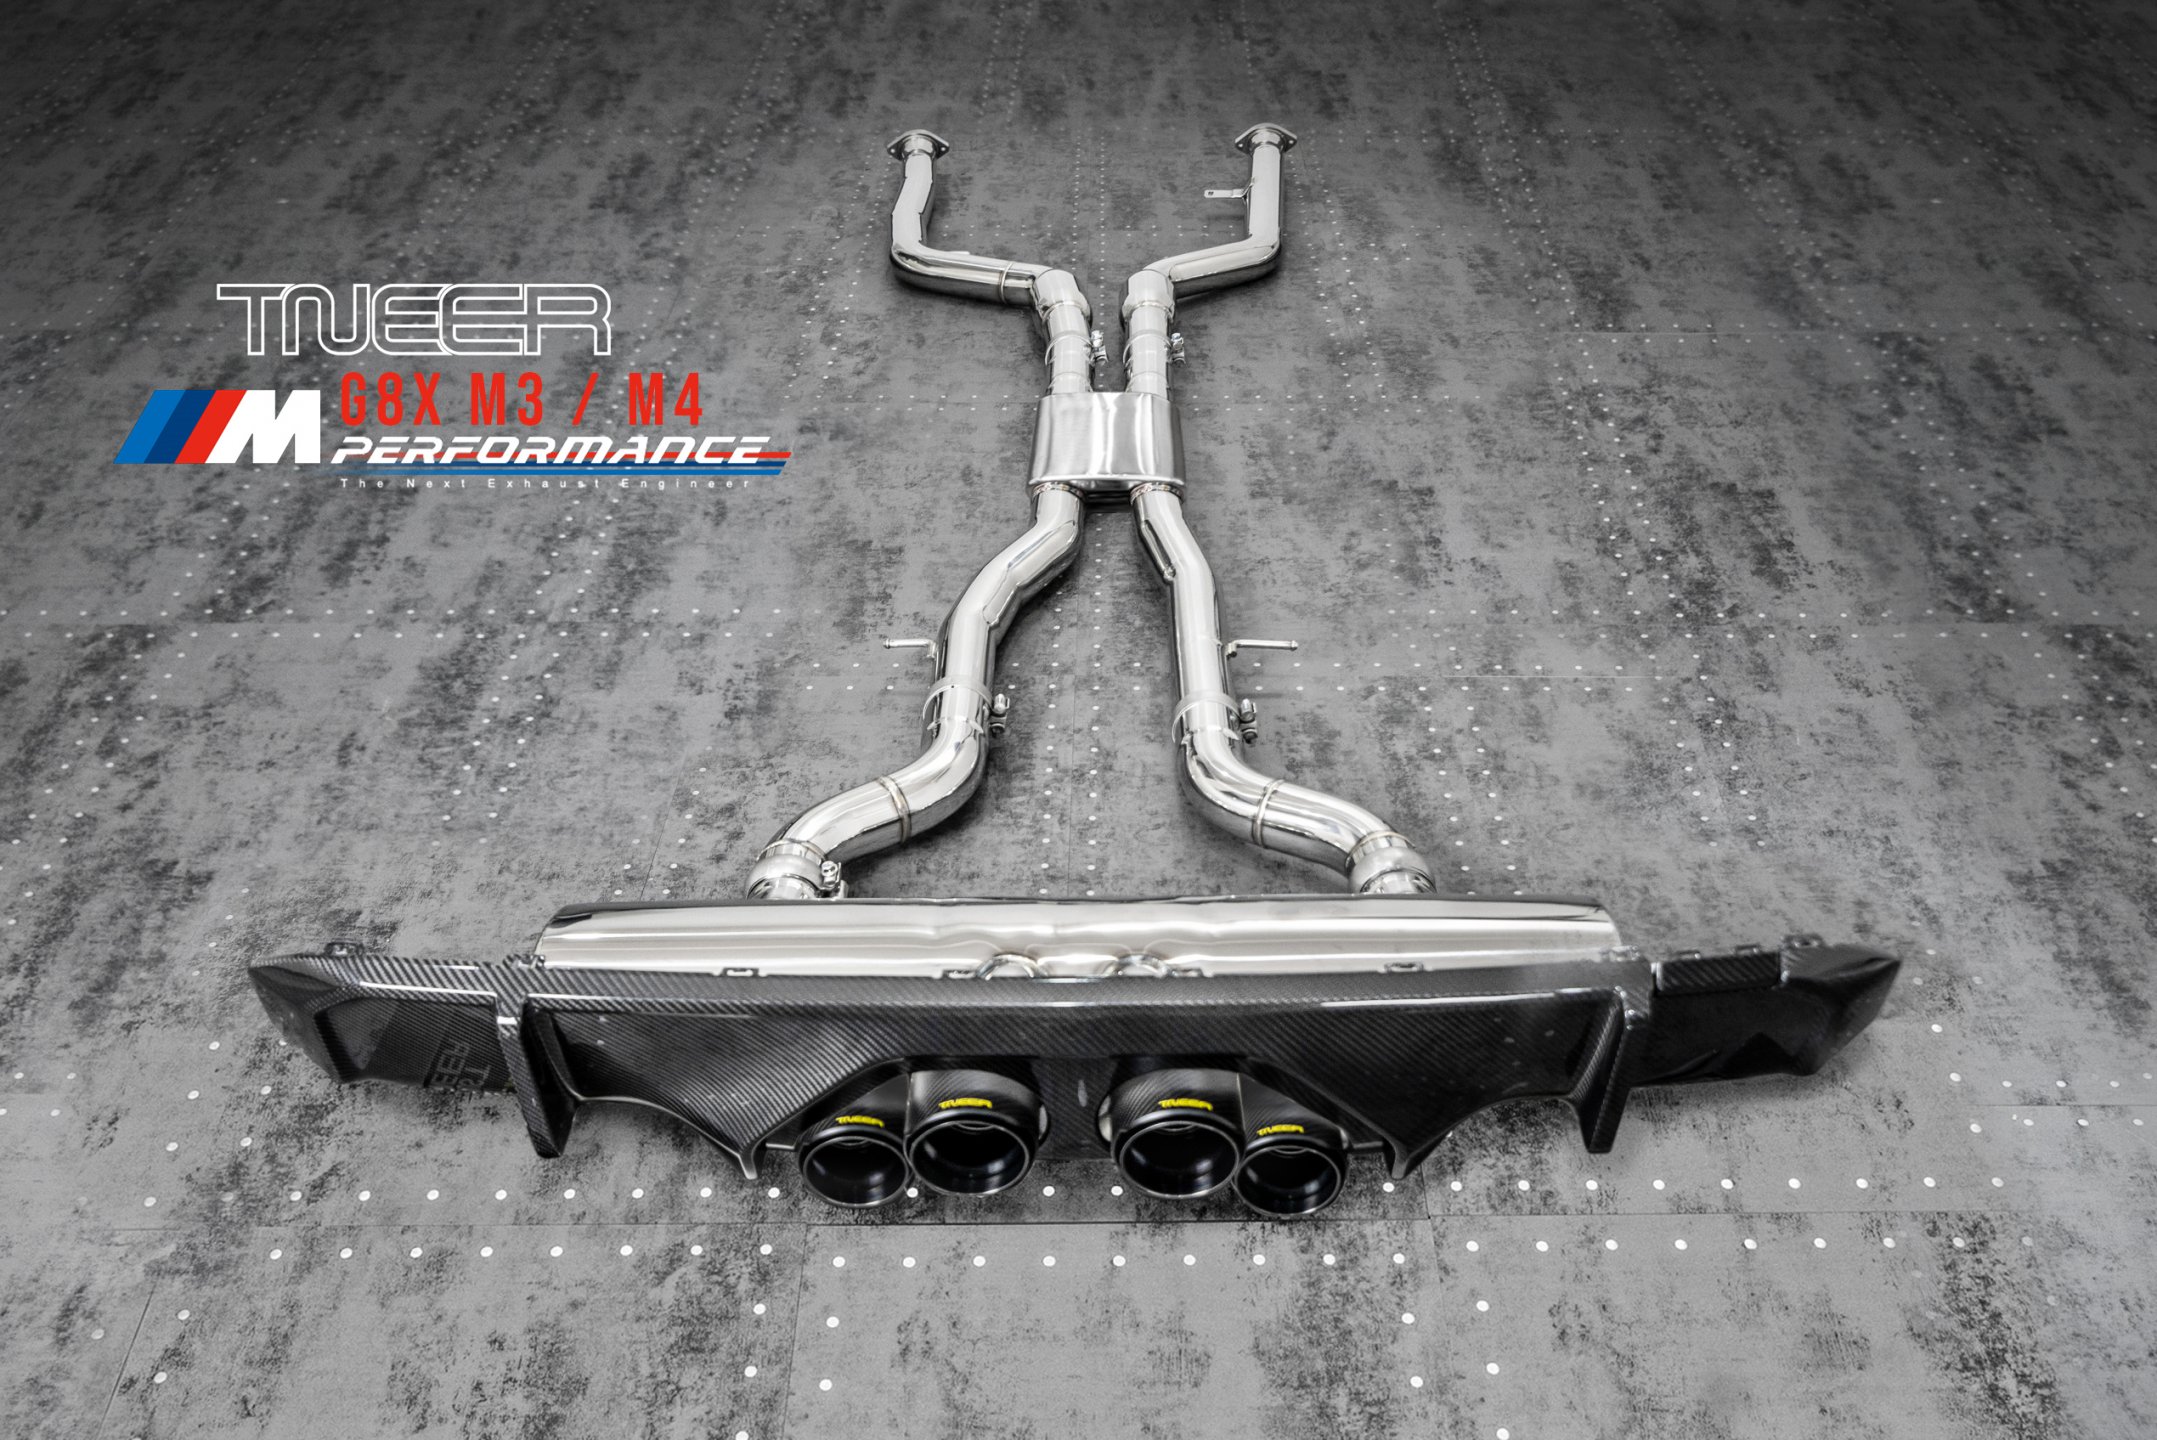 BMW F12 (M6 Coupe) TNEER Downpipes